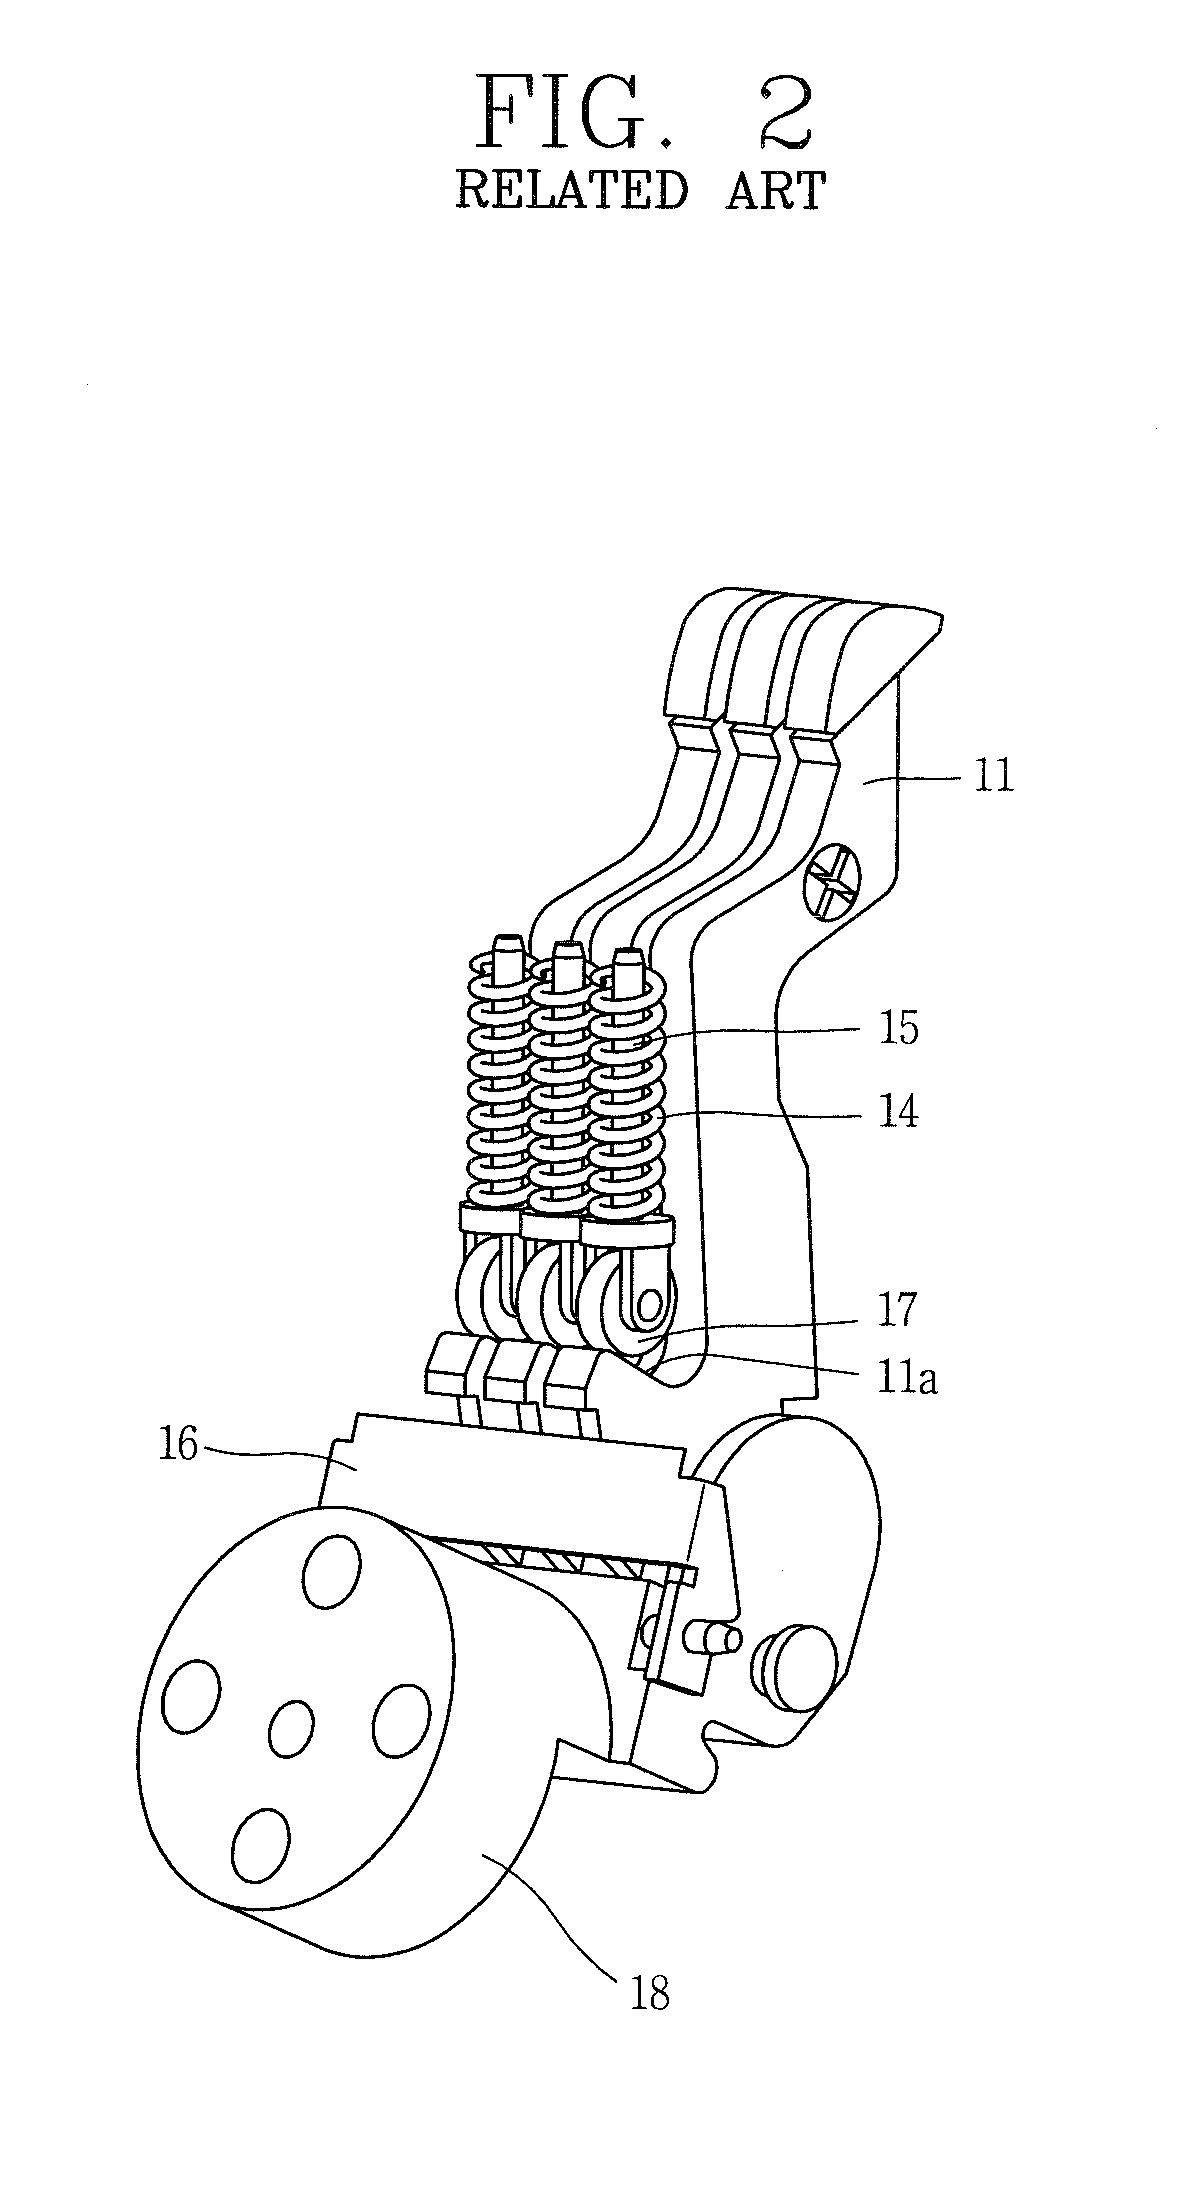 Movable contactor assembly for current limiting type molded case circuit breaker